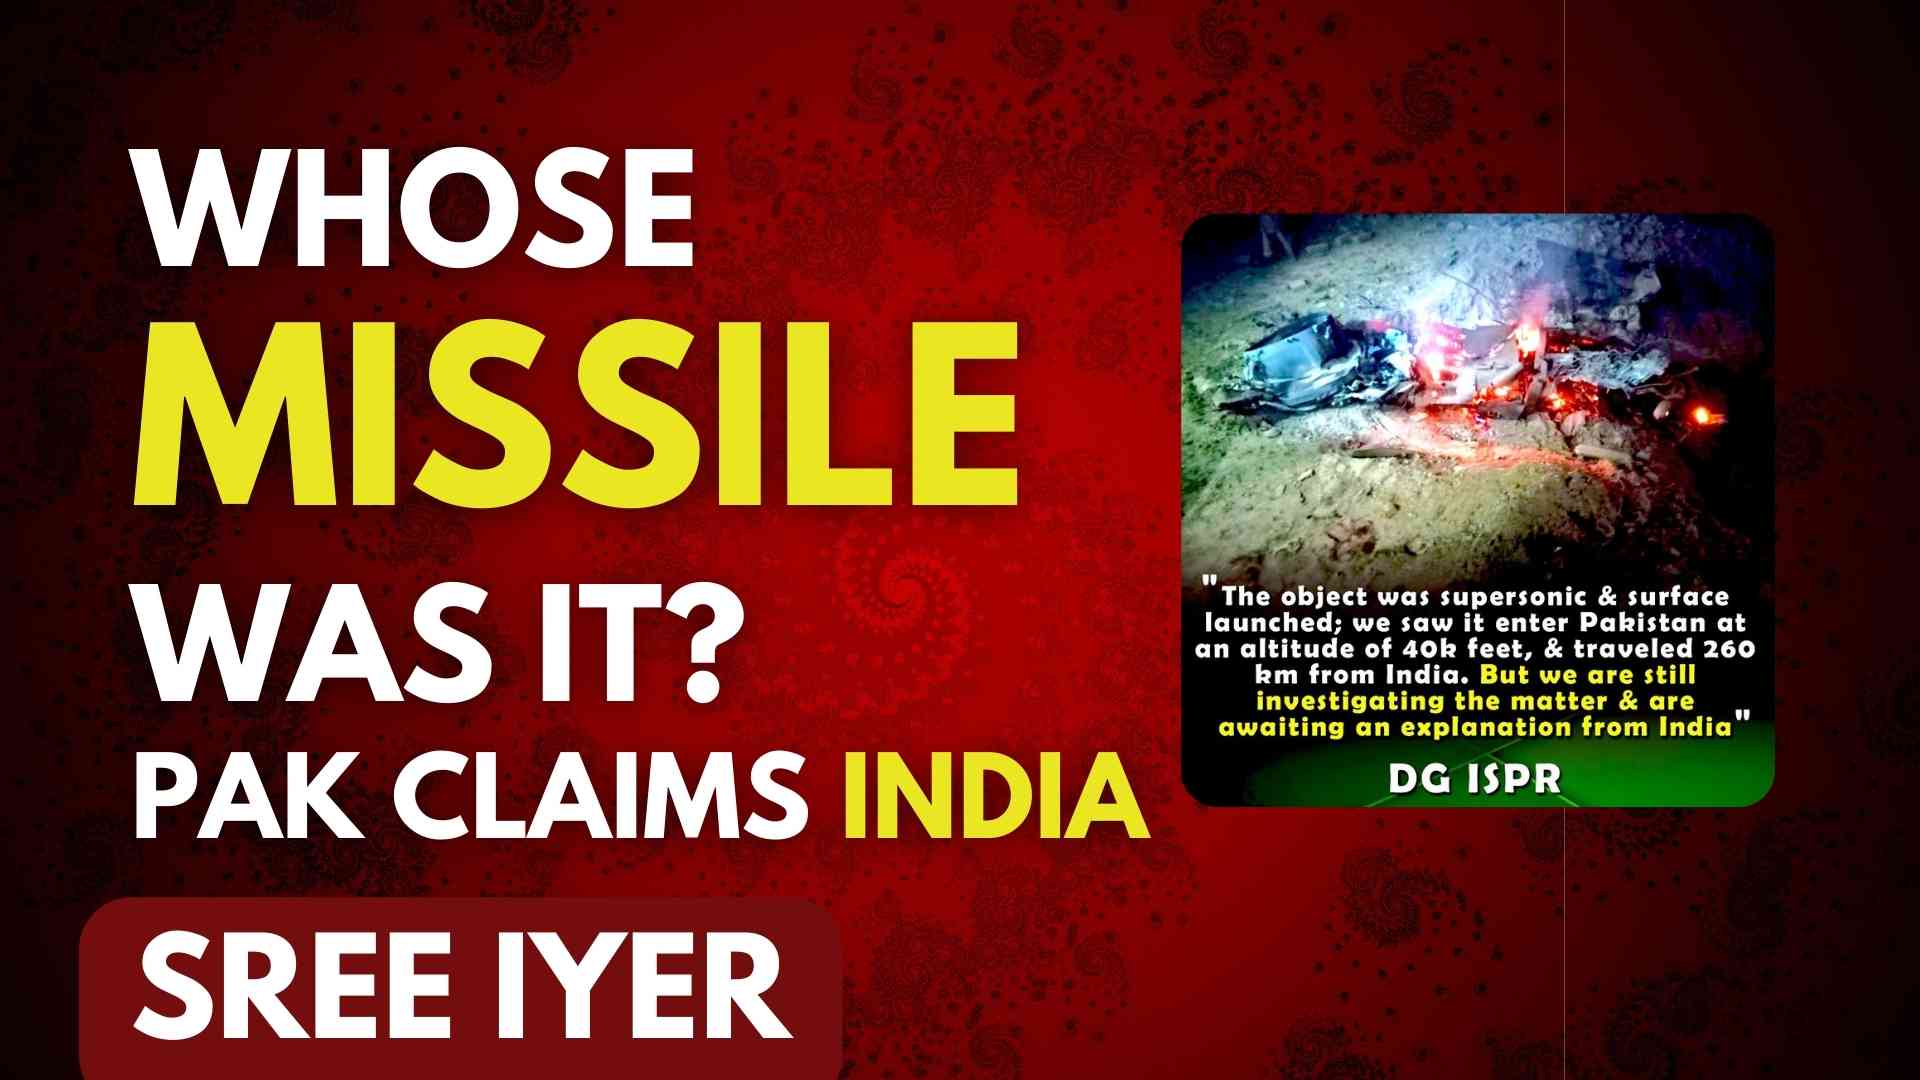 Pakistan is claiming that a supersonic missile from India landed in its territory. If so, why is India not saying anything? Even the world is quiet. Is this an elaborate ruse on the part of Pakistan to divert attention away from the tricks Imran Khan govt. is playing to convene the Pakistan National Assembly to have a confidence test? All this & more!